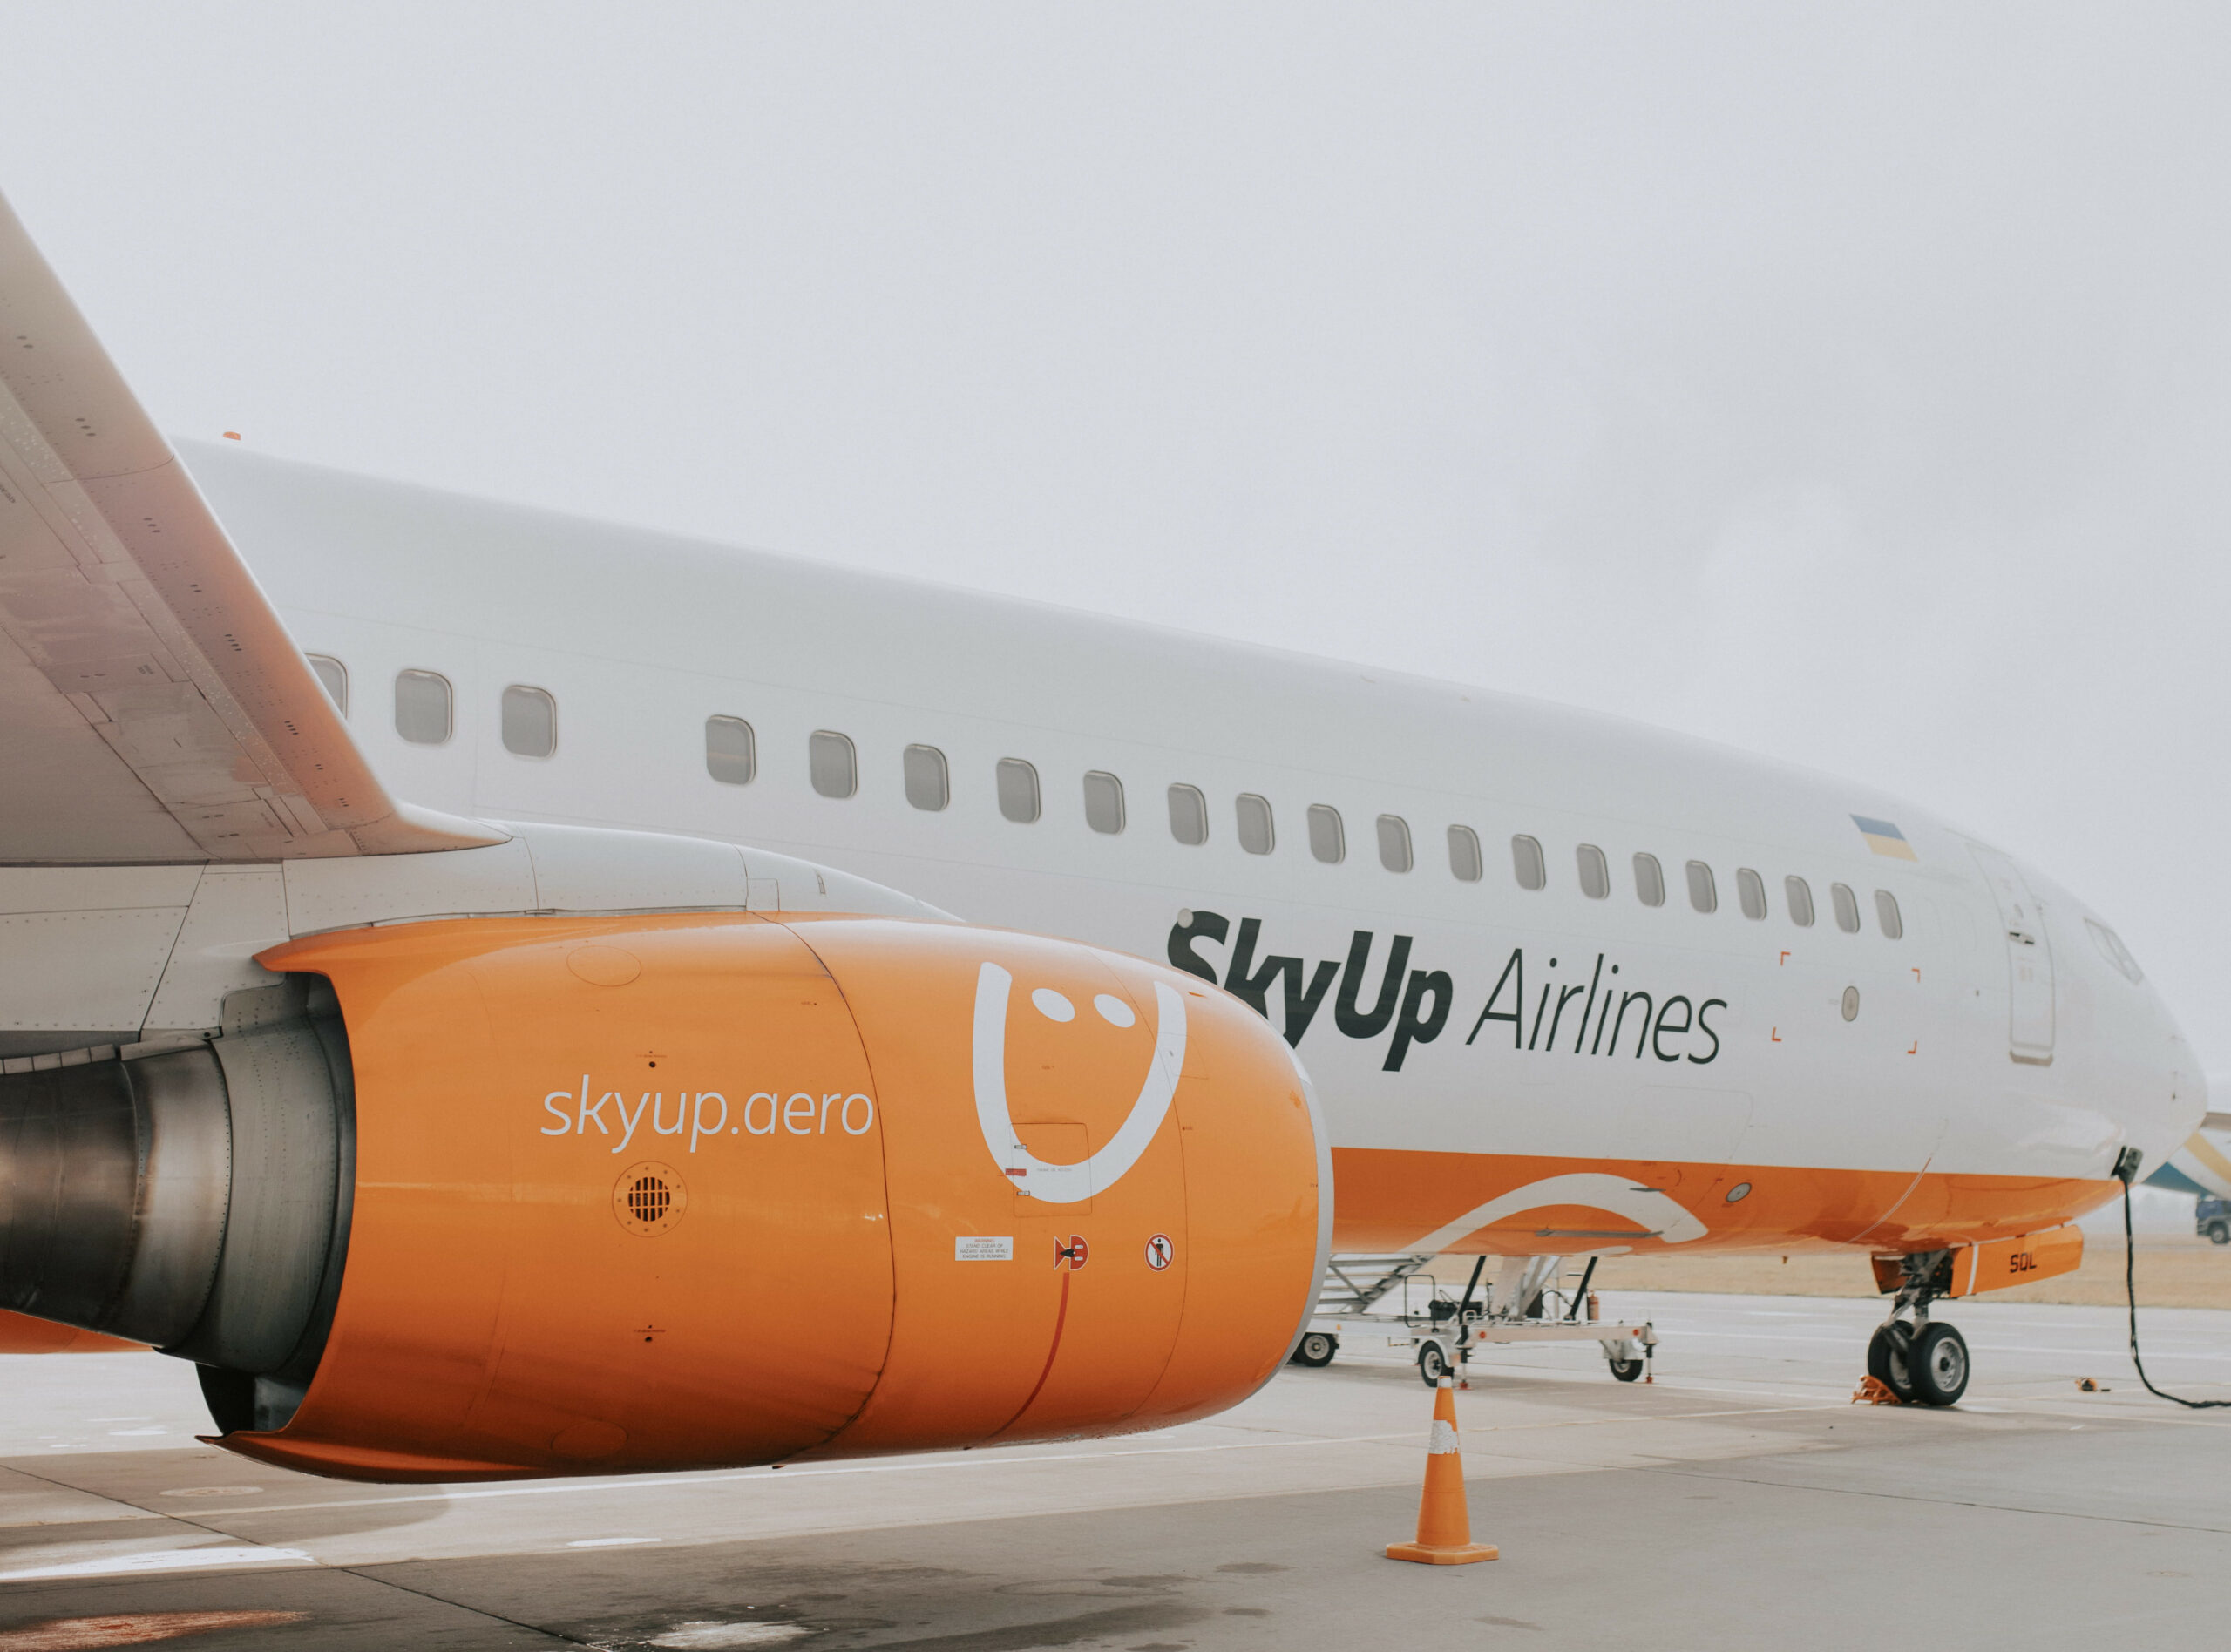 Close-up of a SkyUp Airlines aircraft on the tarmac.